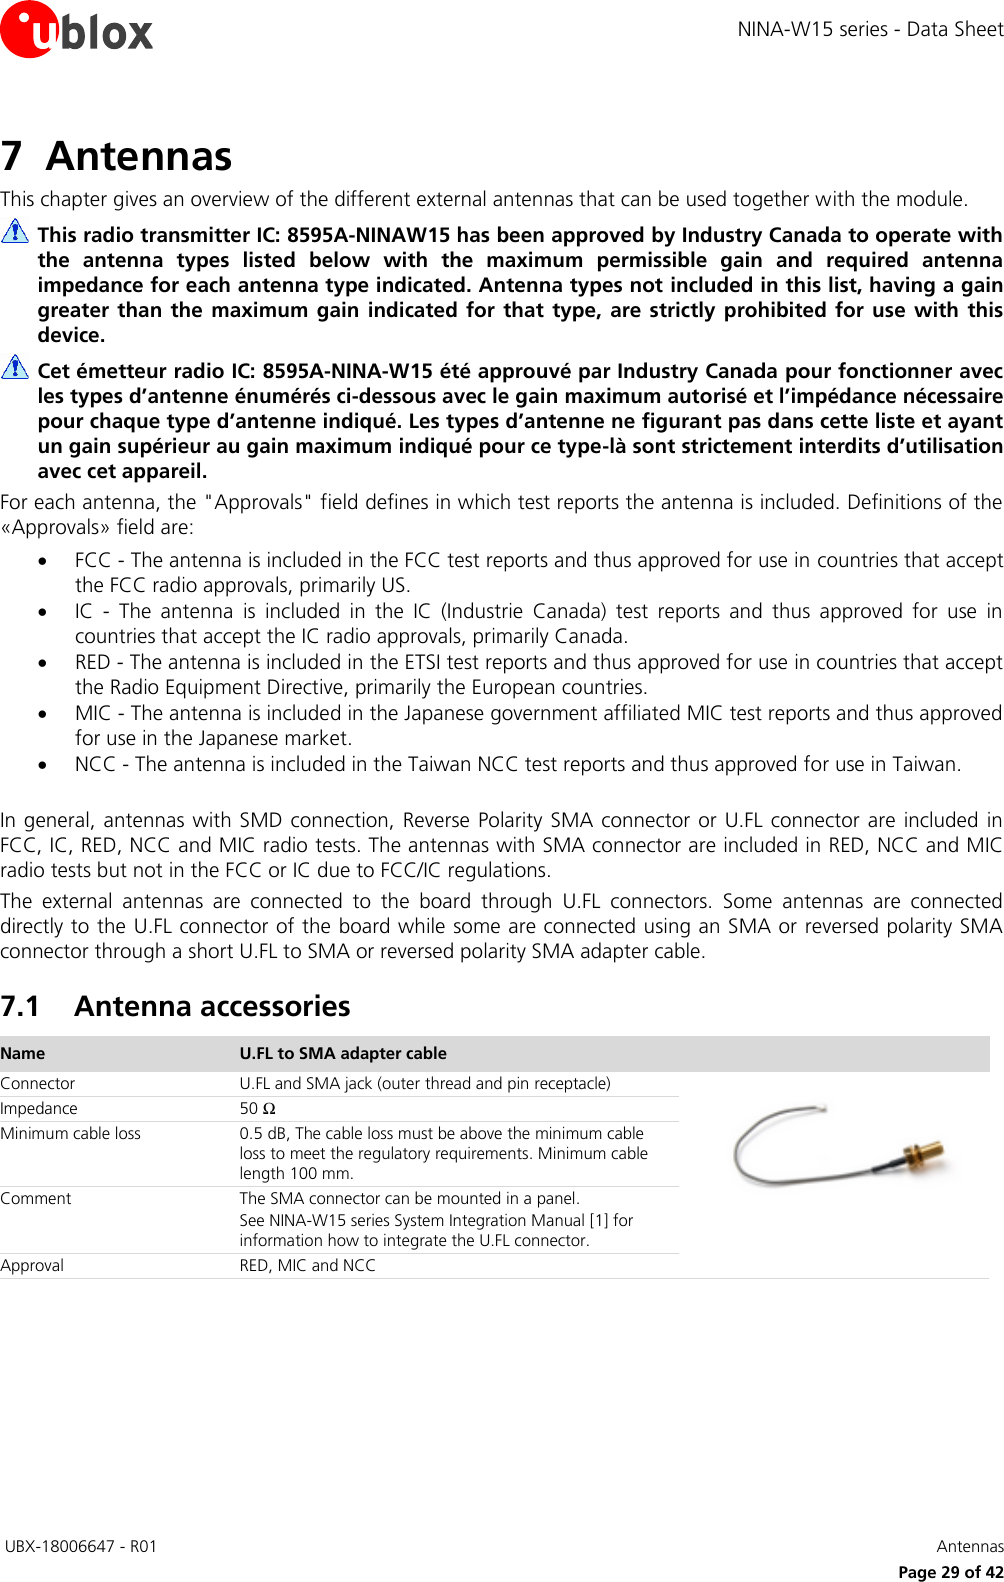 NINA-W15 series - Data Sheet  UBX-18006647 - R01   Antennas     Page 29 of 42 7 Antennas This chapter gives an overview of the different external antennas that can be used together with the module.  This radio transmitter IC: 8595A-NINAW15 has been approved by Industry Canada to operate with the  antenna  types  listed  below  with  the  maximum  permissible  gain  and  required  antenna impedance for each antenna type indicated. Antenna types not included in this list, having a gain greater  than  the  maximum  gain  indicated  for  that type,  are strictly  prohibited  for  use  with  this device.  Cet émetteur radio IC: 8595A-NINA-W15 été approuvé par Industry Canada pour fonctionner avec les types d’antenne énumérés ci-dessous avec le gain maximum autorisé et l’impédance nécessaire pour chaque type d’antenne indiqué. Les types d’antenne ne figurant pas dans cette liste et ayant un gain supérieur au gain maximum indiqué pour ce type-là sont strictement interdits d’utilisation avec cet appareil. For each antenna, the &quot;Approvals&quot; field defines in which test reports the antenna is included. Definitions of the «Approvals» field are:  FCC - The antenna is included in the FCC test reports and thus approved for use in countries that accept the FCC radio approvals, primarily US.  IC  -  The  antenna  is  included  in  the  IC  (Industrie  Canada)  test  reports  and  thus  approved  for  use  in countries that accept the IC radio approvals, primarily Canada.  RED - The antenna is included in the ETSI test reports and thus approved for use in countries that accept the Radio Equipment Directive, primarily the European countries.  MIC - The antenna is included in the Japanese government affiliated MIC test reports and thus approved for use in the Japanese market.  NCC - The antenna is included in the Taiwan NCC test reports and thus approved for use in Taiwan.  In general, antennas with SMD  connection,  Reverse Polarity  SMA connector  or U.FL connector  are  included in FCC, IC, RED, NCC and MIC radio tests. The antennas with SMA connector are included in RED, NCC and MIC radio tests but not in the FCC or IC due to FCC/IC regulations.  The  external  antennas  are  connected  to  the  board  through  U.FL  connectors.  Some  antennas  are  connected directly to the U.FL connector of the board while some are connected using an SMA or reversed polarity SMA connector through a short U.FL to SMA or reversed polarity SMA adapter cable. 7.1 Antenna accessories Name U.FL to SMA adapter cable  Connector U.FL and SMA jack (outer thread and pin receptacle)  Impedance 50 Ω Minimum cable loss 0.5 dB, The cable loss must be above the minimum cable loss to meet the regulatory requirements. Minimum cable length 100 mm. Comment The SMA connector can be mounted in a panel. See NINA-W15 series System Integration Manual [1] for  information how to integrate the U.FL connector. Approval RED, MIC and NCC  